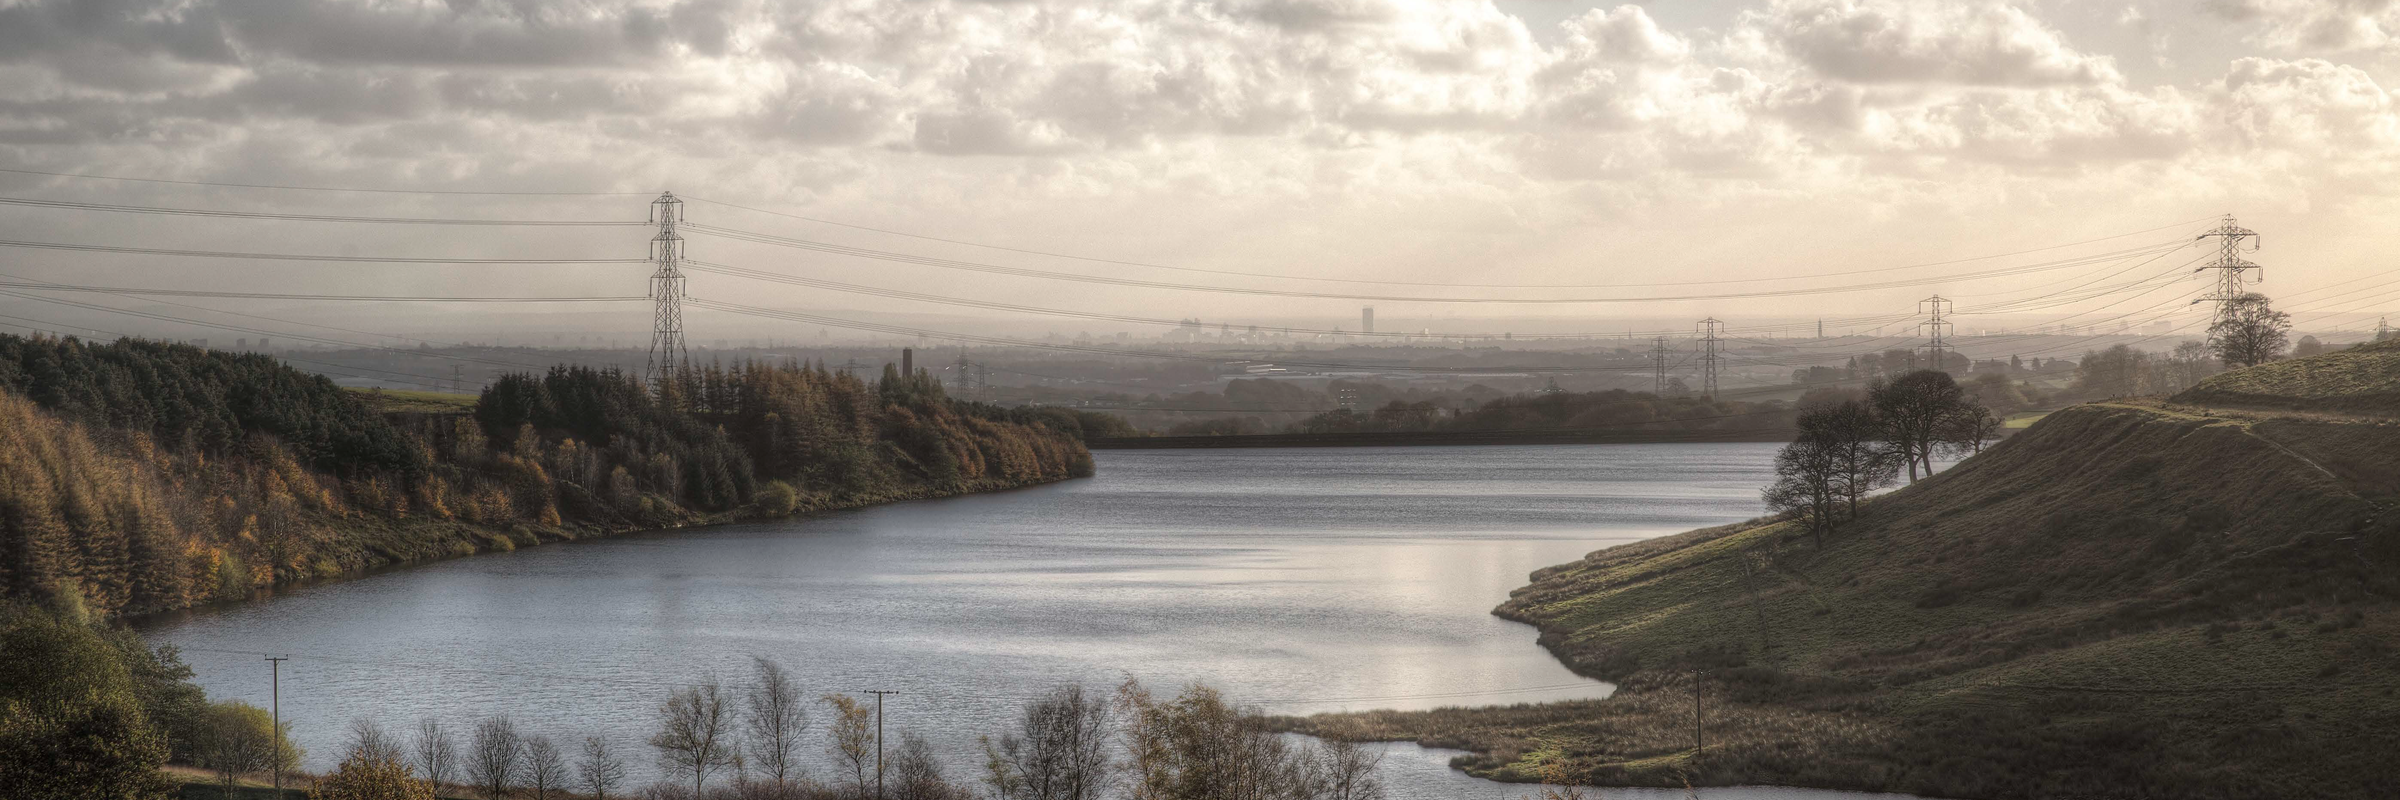 Picture of Greenbooth Reservoir showing water and surrounding land. Picture obtained from United Utilities with their permission to use.